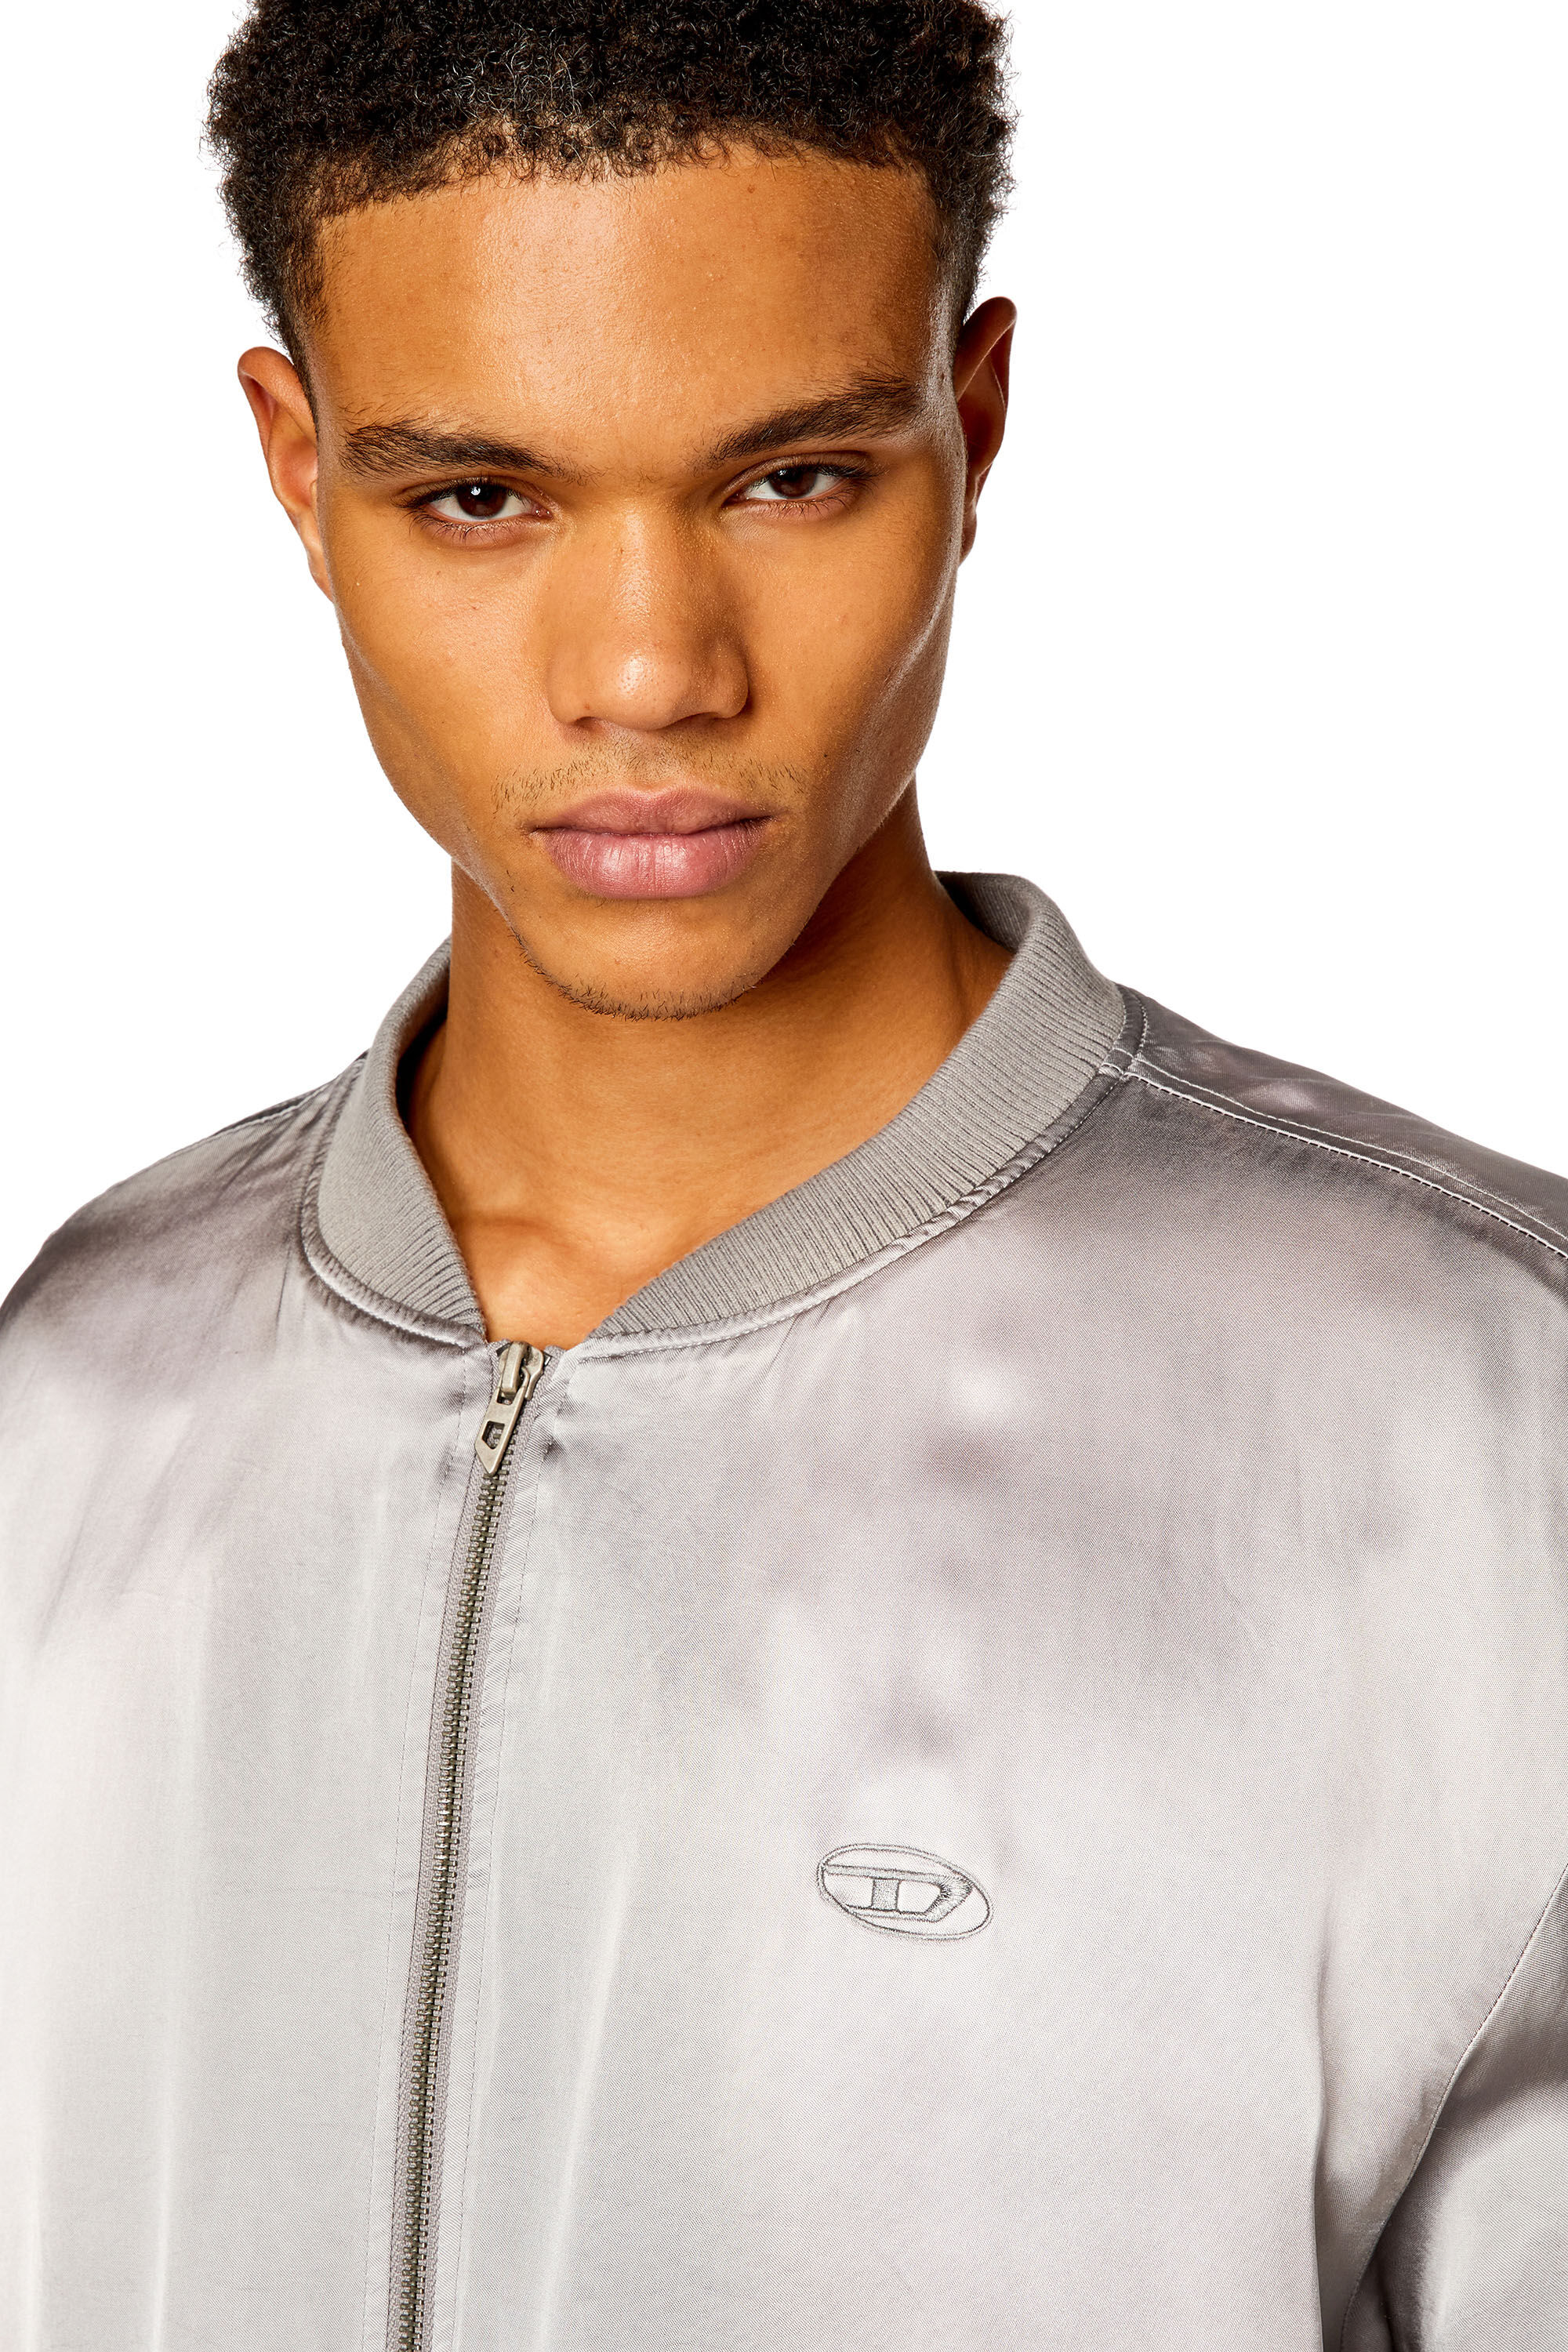 Diesel - J-MARTEX, Man Satin bomber jacket with faded effect in Grey - Image 3